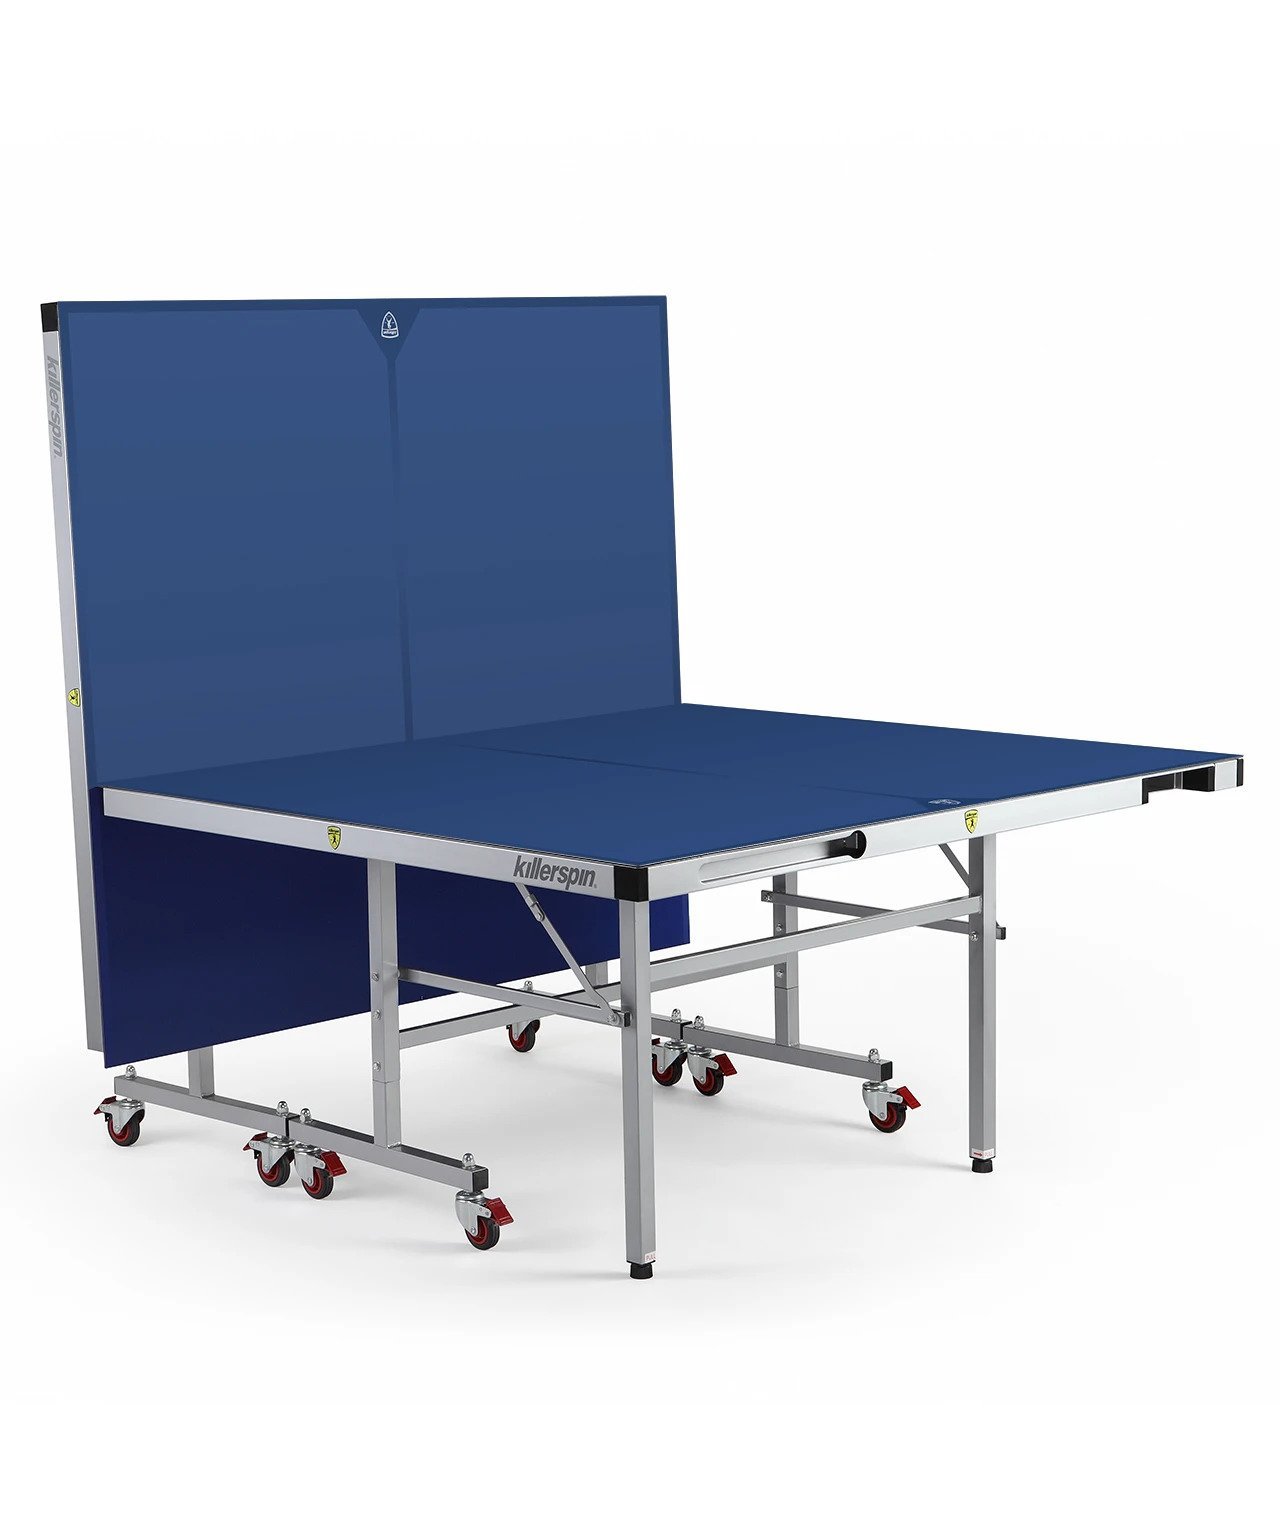 Outdoor Ping Pong Table with Storage Pockets - MyT7 Breeze by Killerspin - Gym Gear Direct